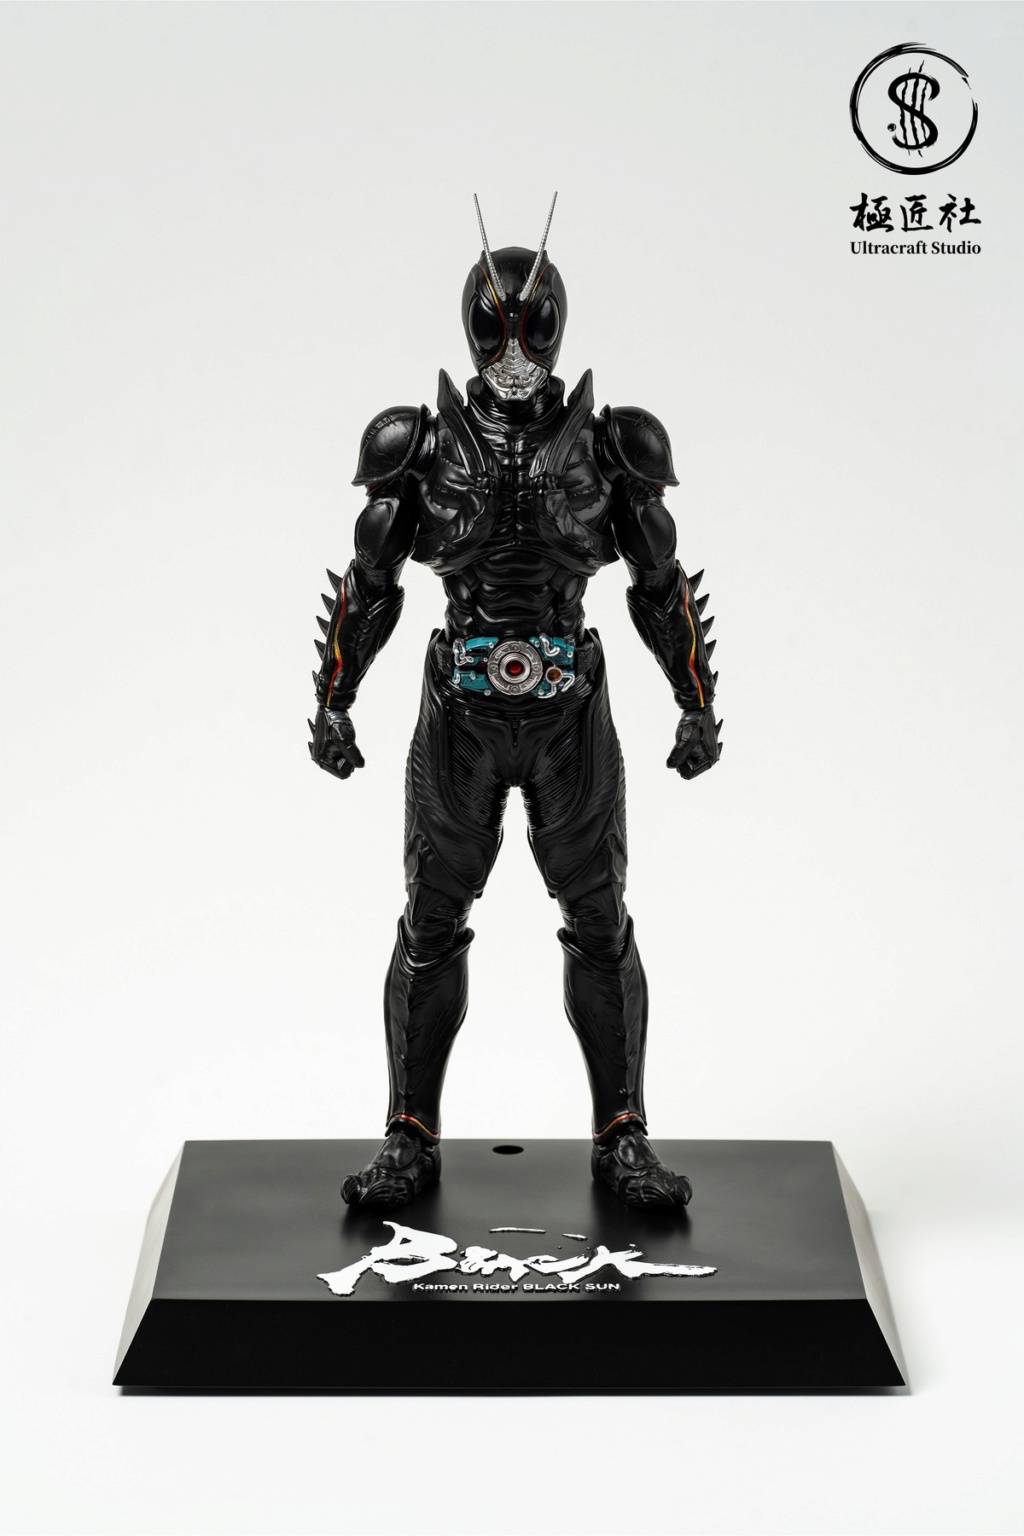 Sci-Fi - NEW PRODUCT: Ultracraft Studio: 1/6 Scale Black Hero (not what you think) 15144712